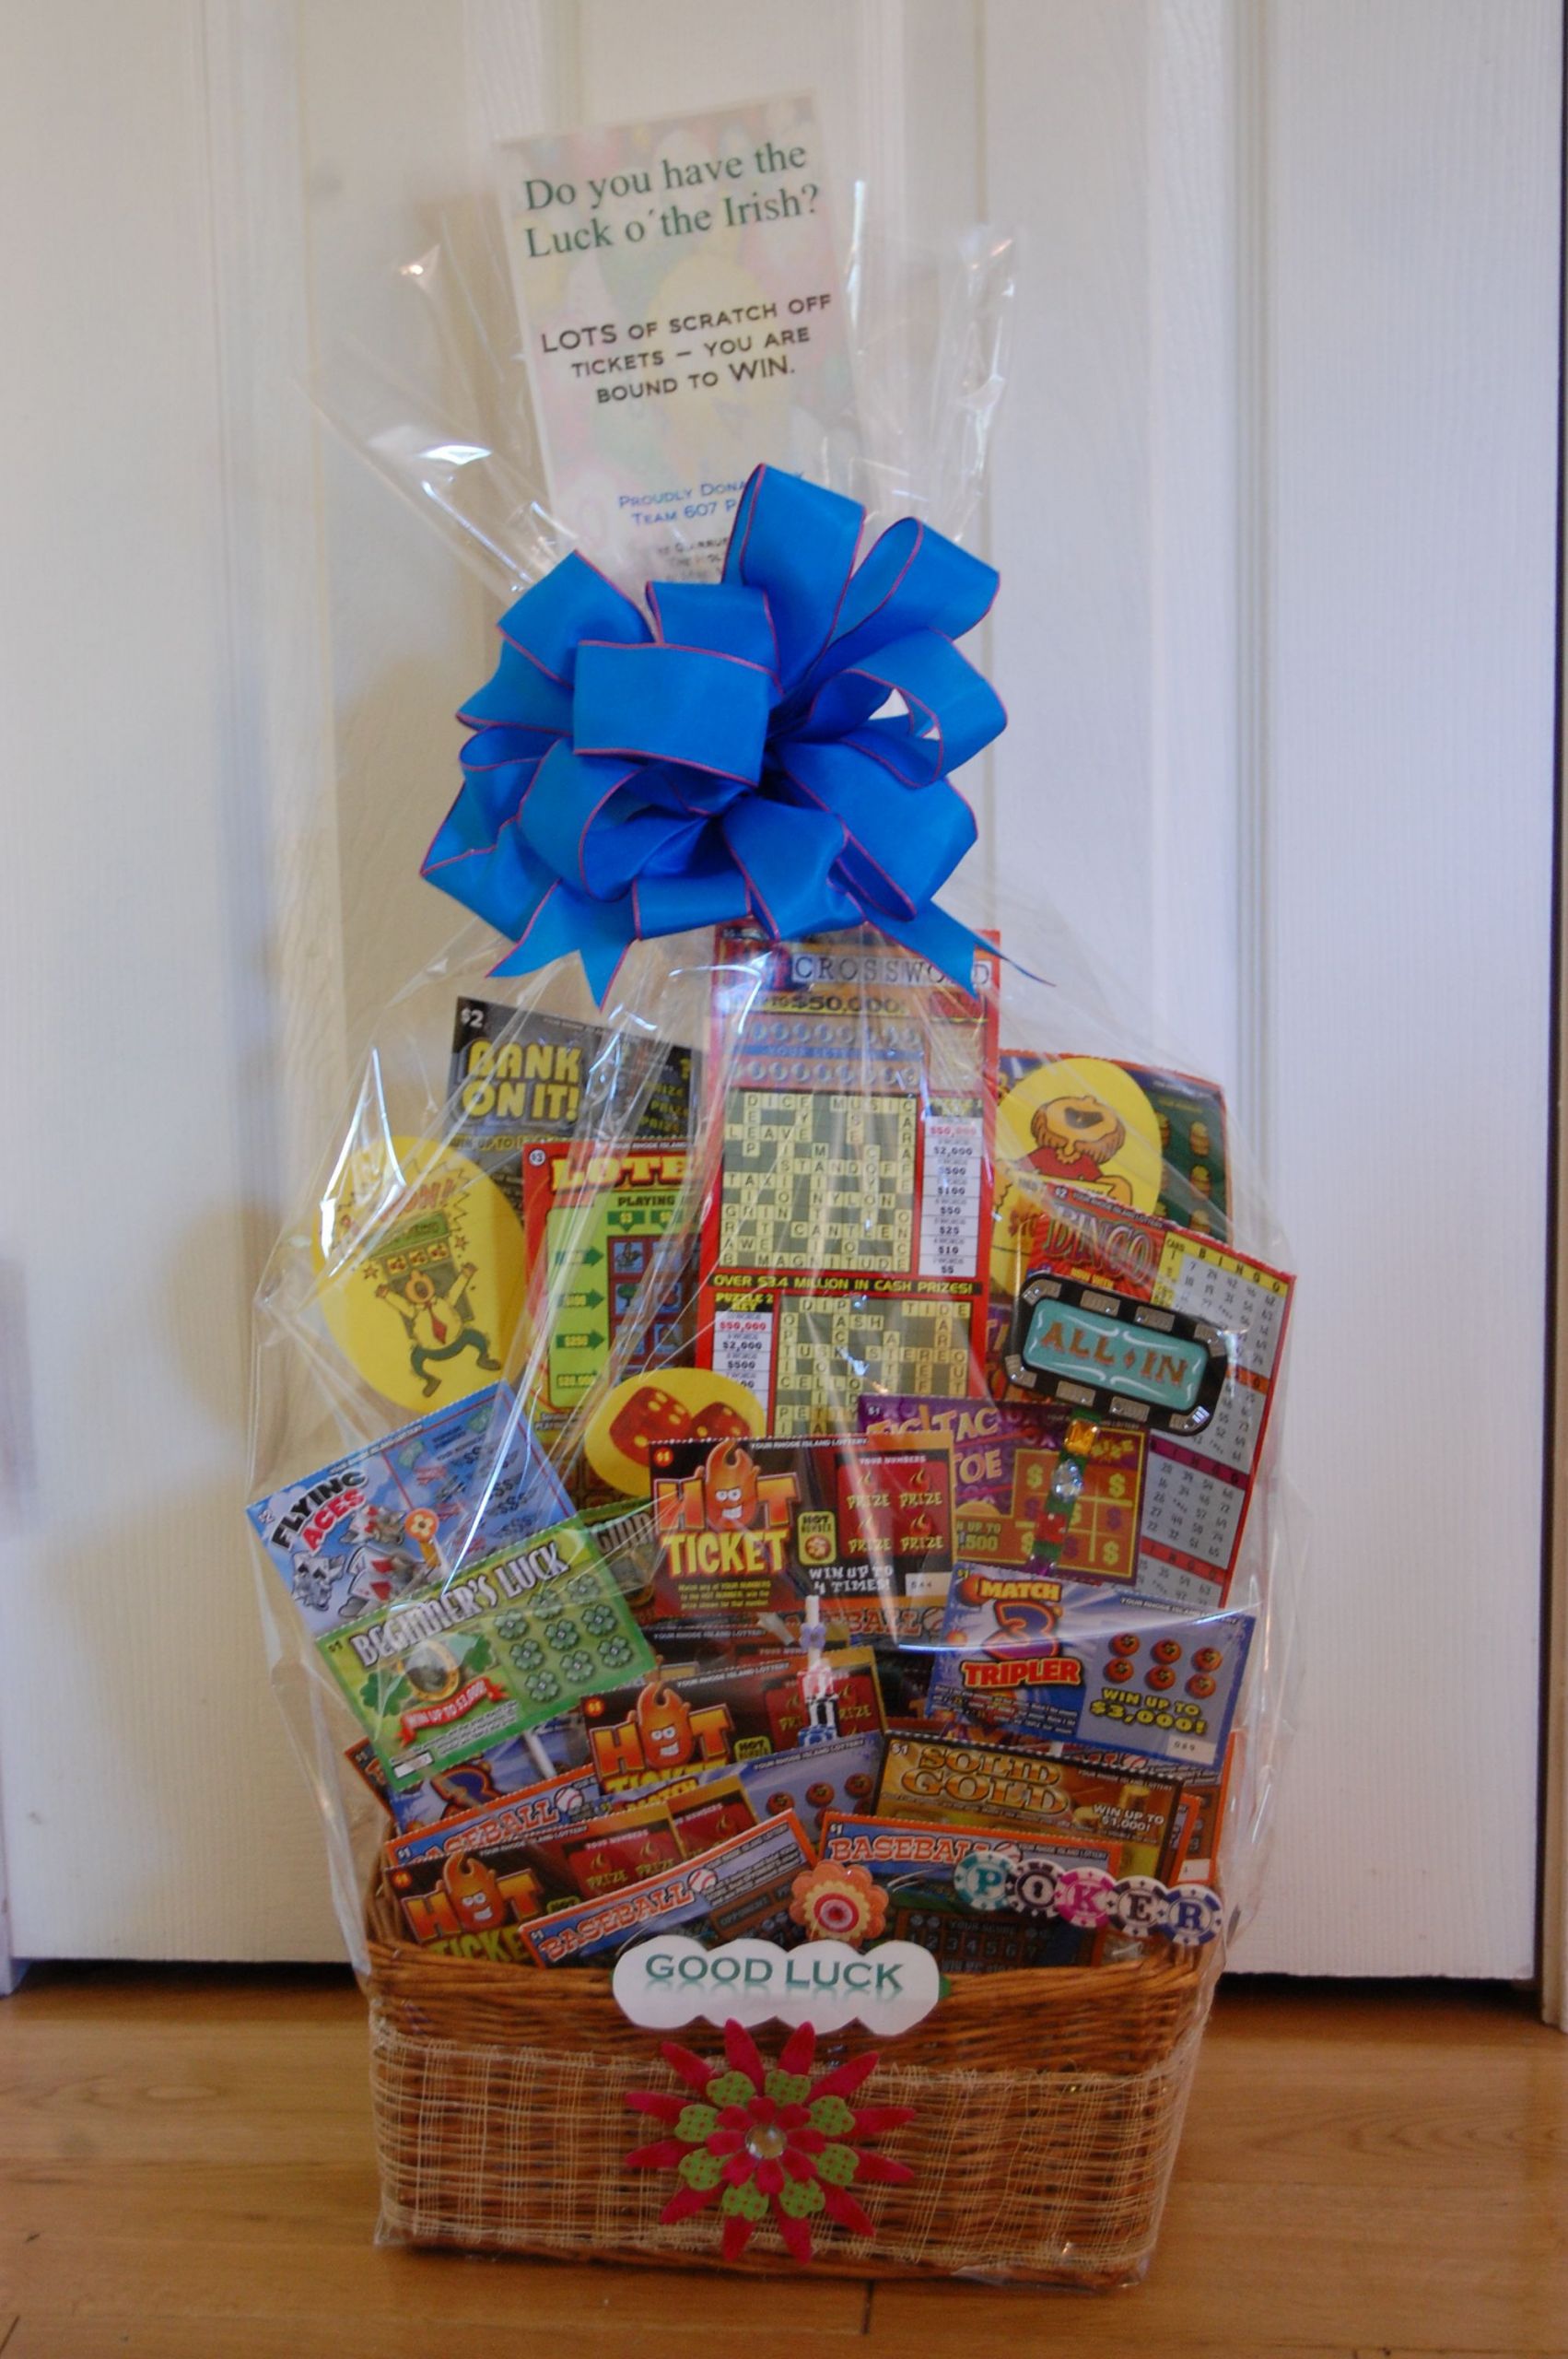 Lottery Gift Basket Ideas
 Lottery t basket Probably spent $25 on lottery tickets